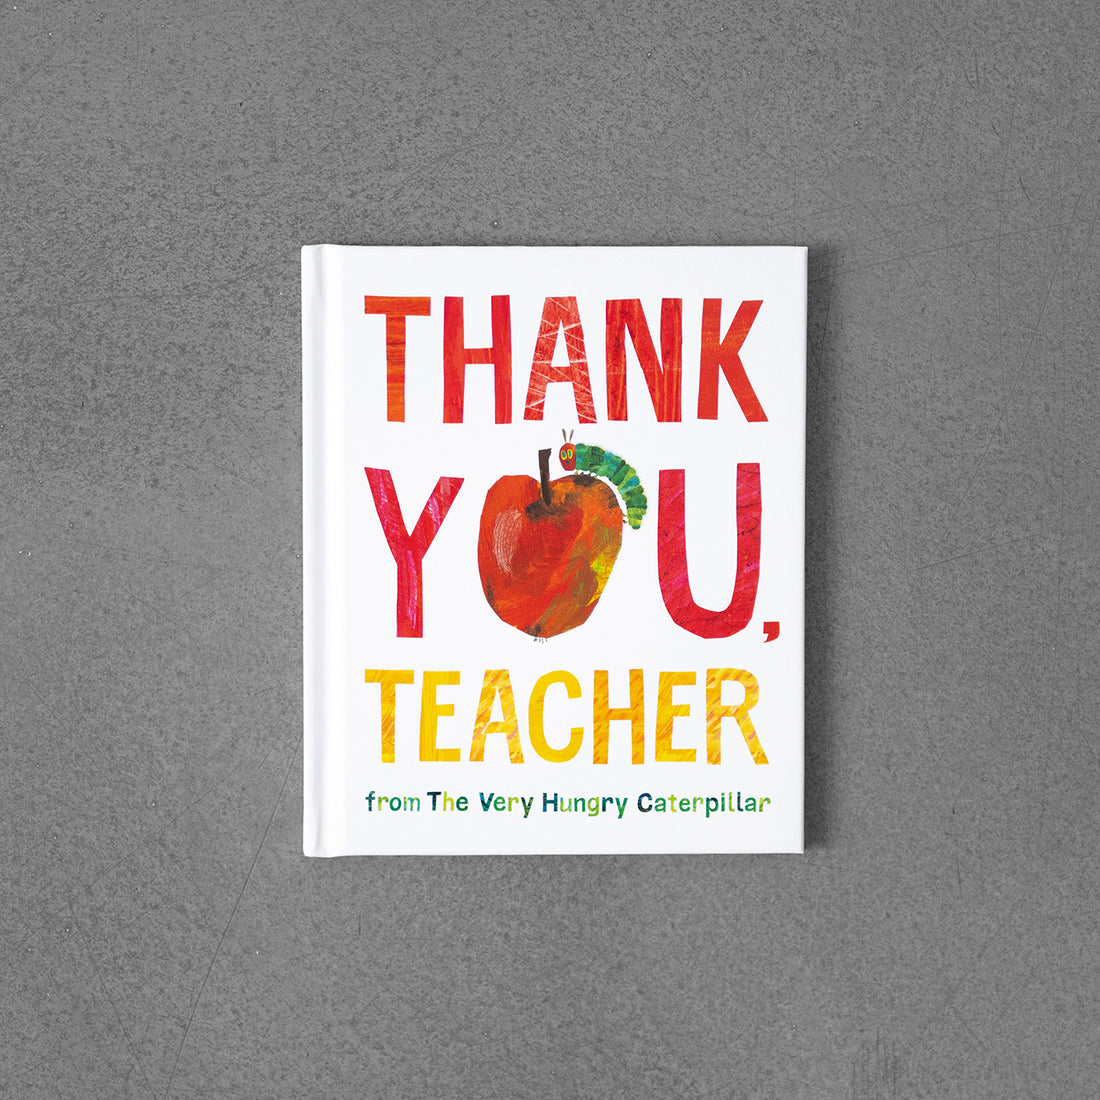 Thank You: Teacher from The Very Hungry Caterpillar – Eric Carle